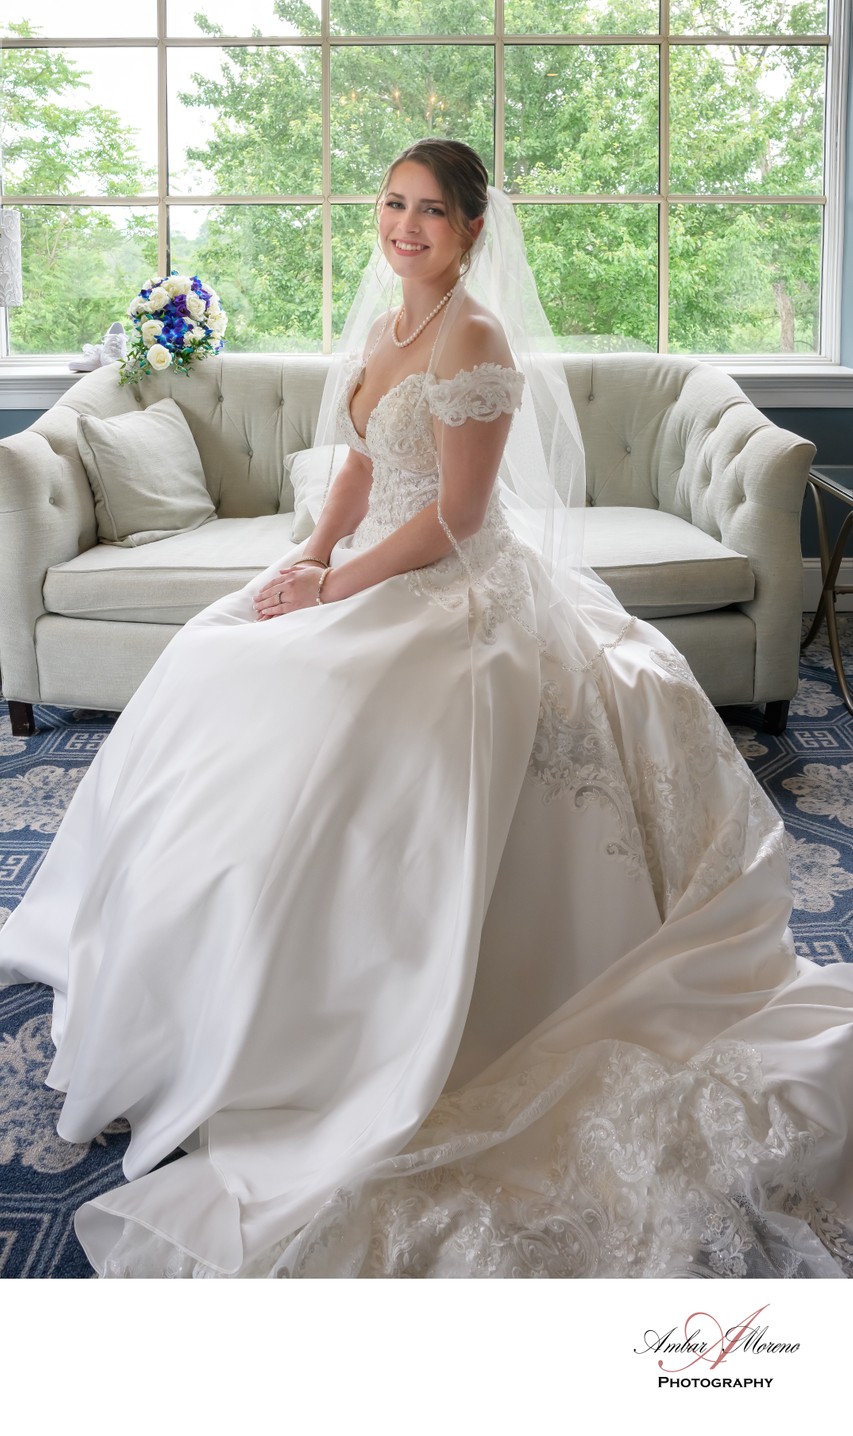 Seated portrait of Bride